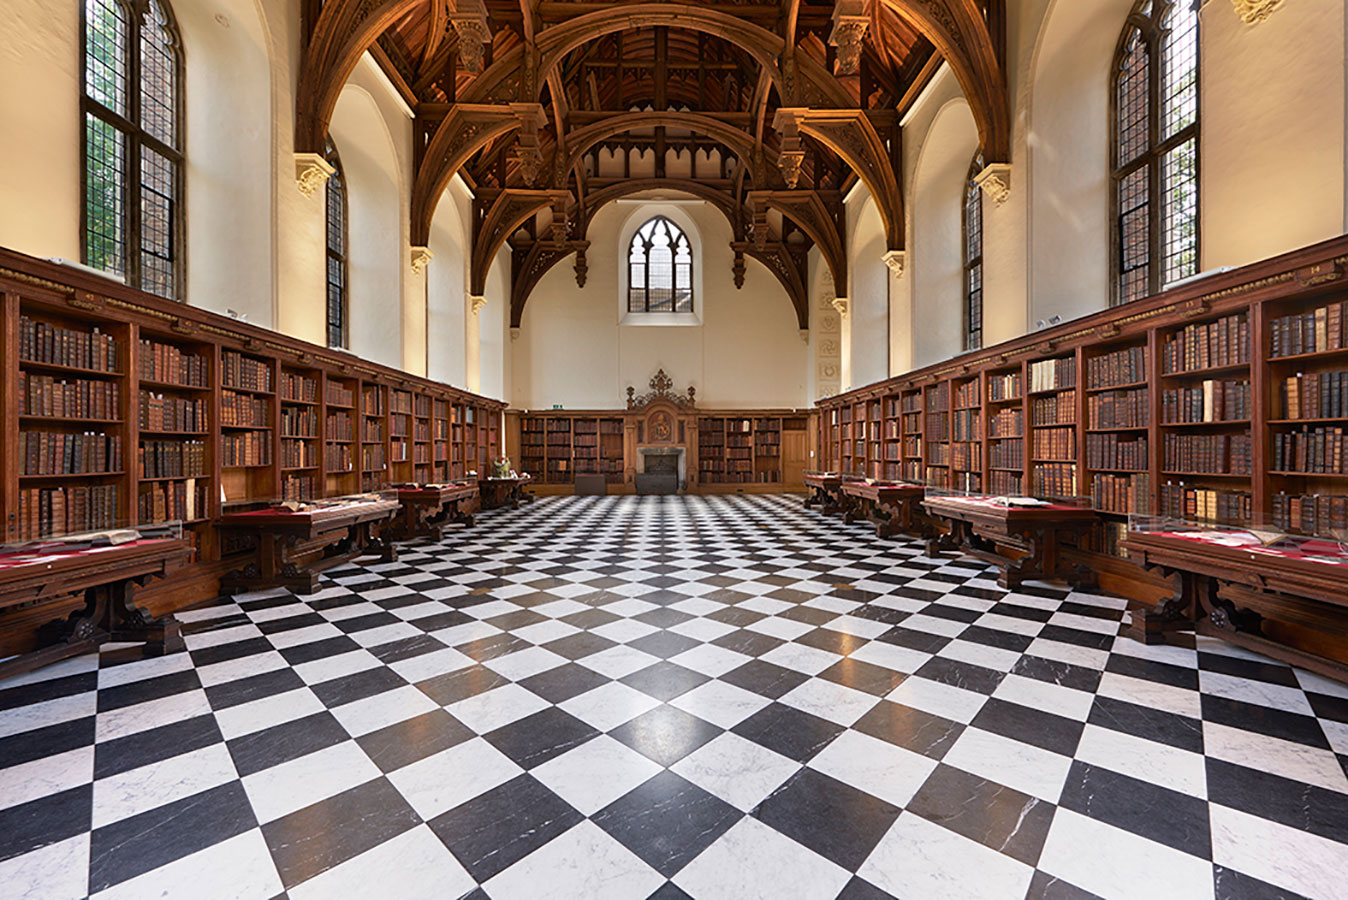 The Great Hall and Old Medieval Library at Lambeth Palace